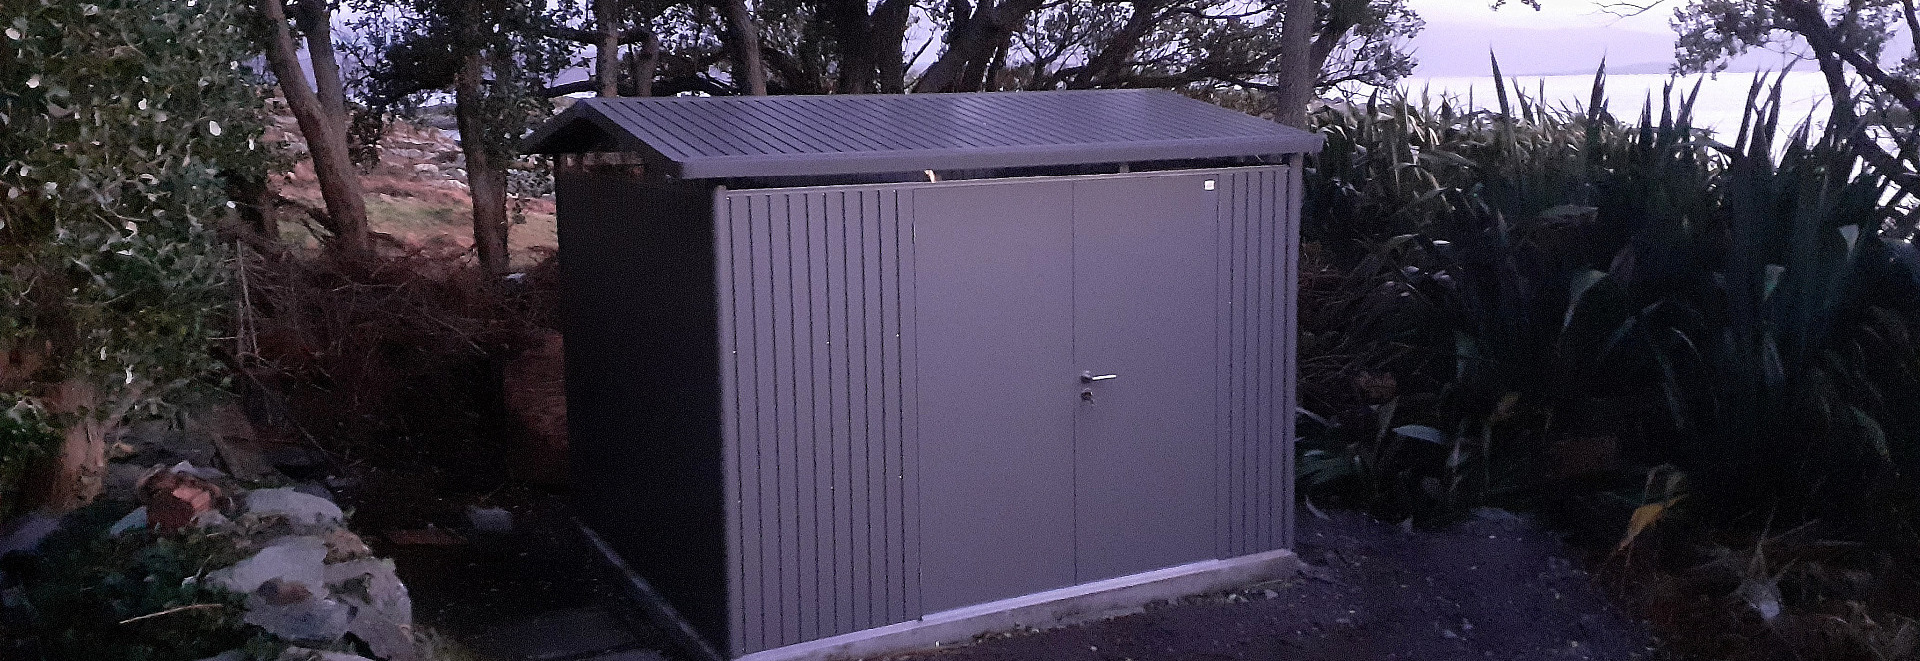 Biohort Panorama Garden Shed, Size P5 in metallic quartz grey - supplied + fitted near Sneem, Co Kerry by Owen Chubb Landscapers